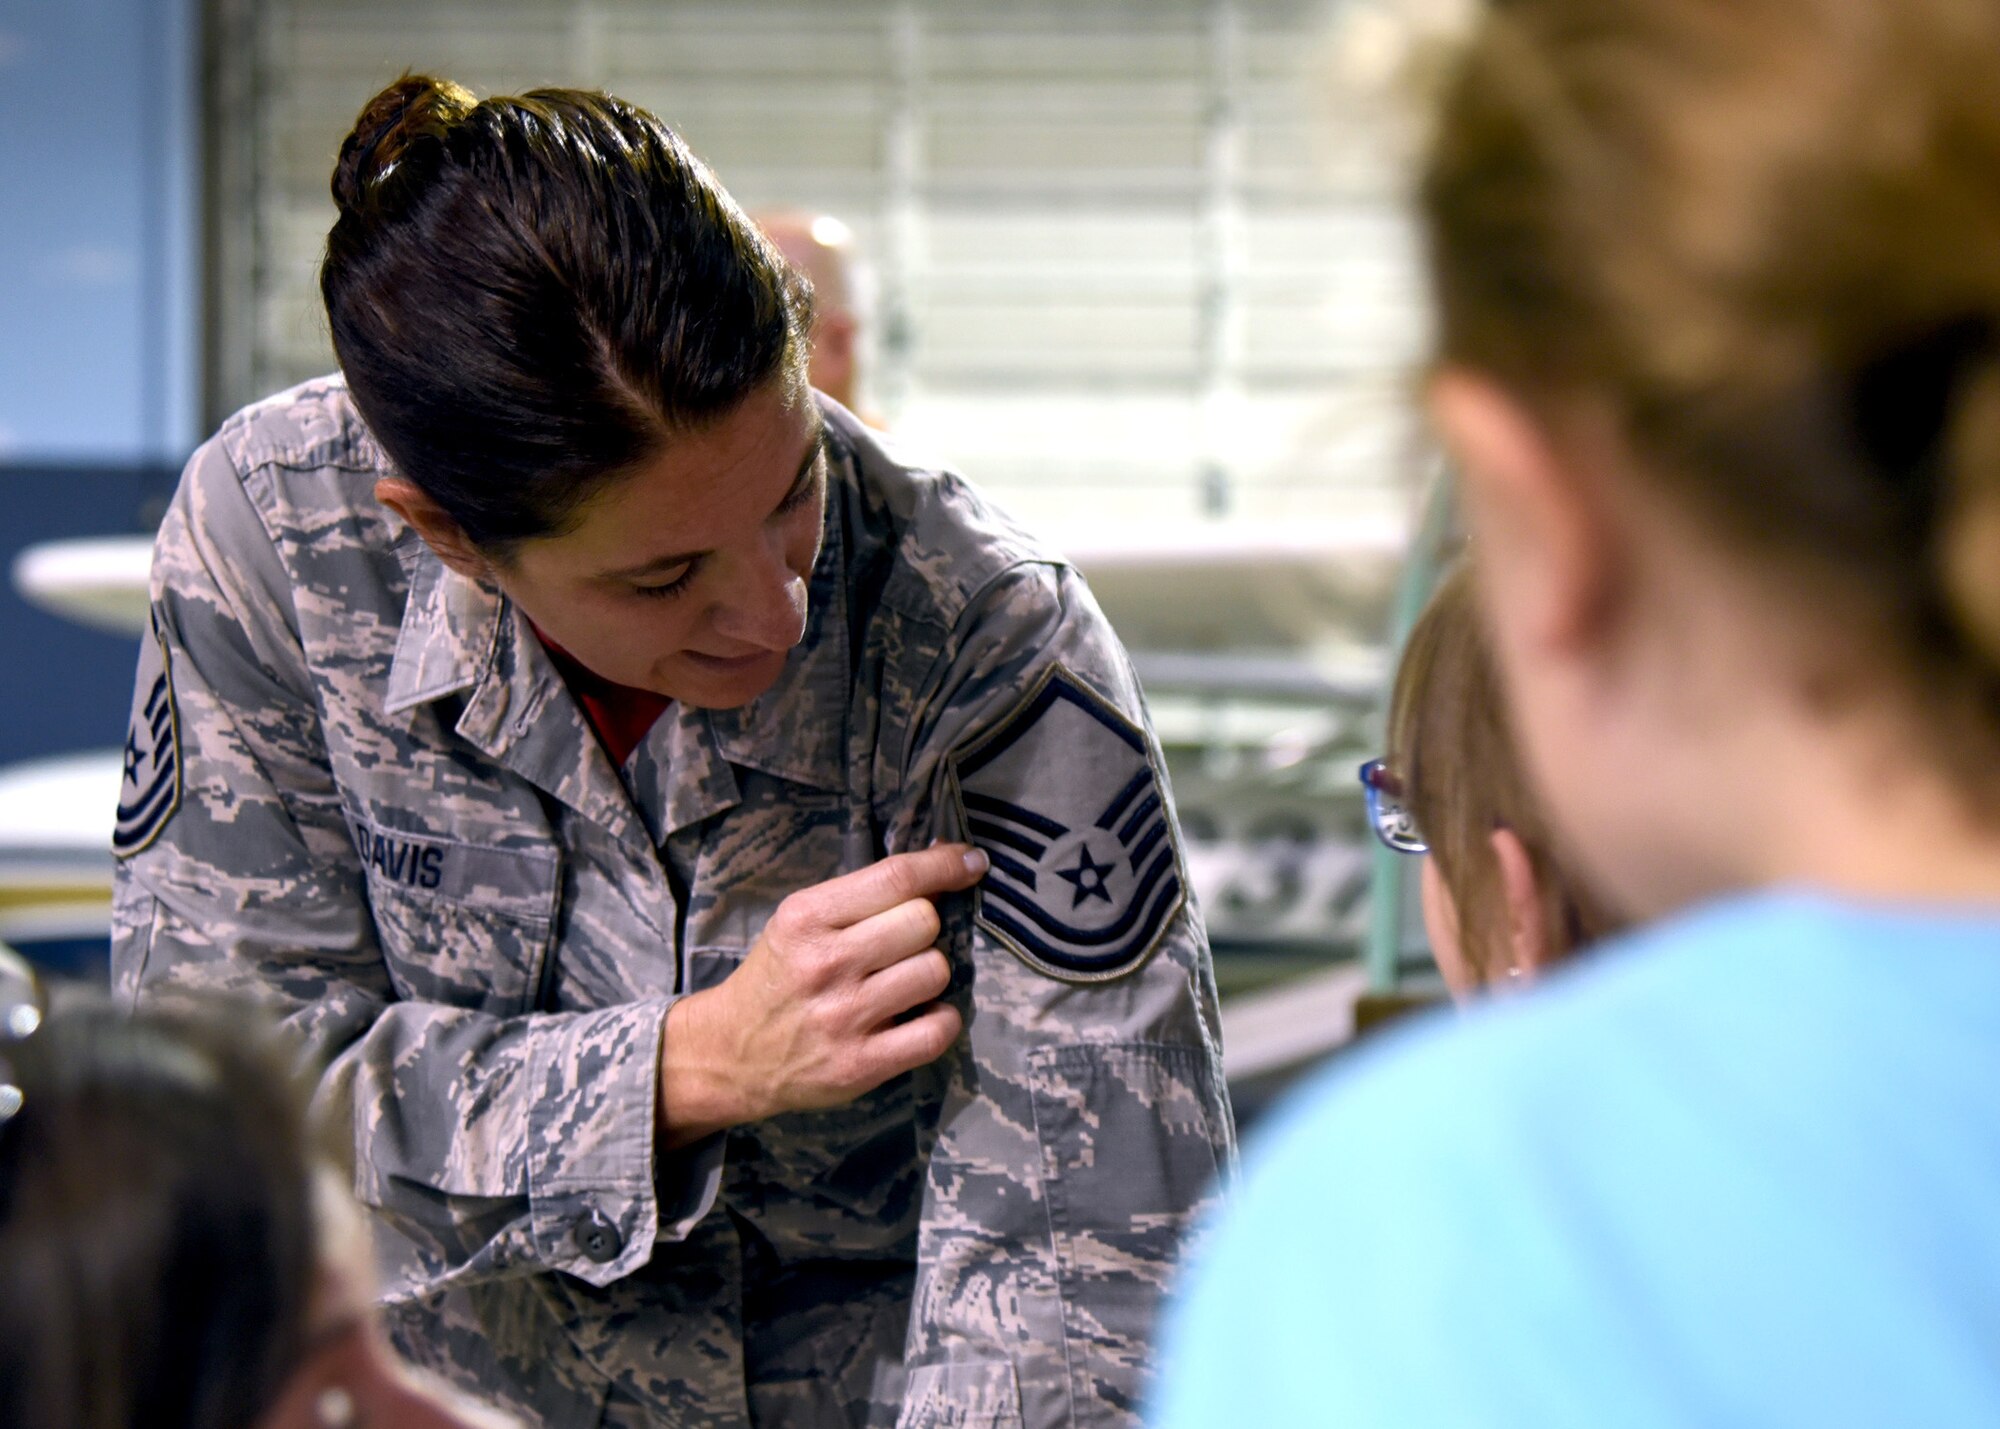 Master Sgt. Wilma Davis from the 117th Maintenance Squadron explains rank during the Women in Aviation event at the Southern Museum of Flight